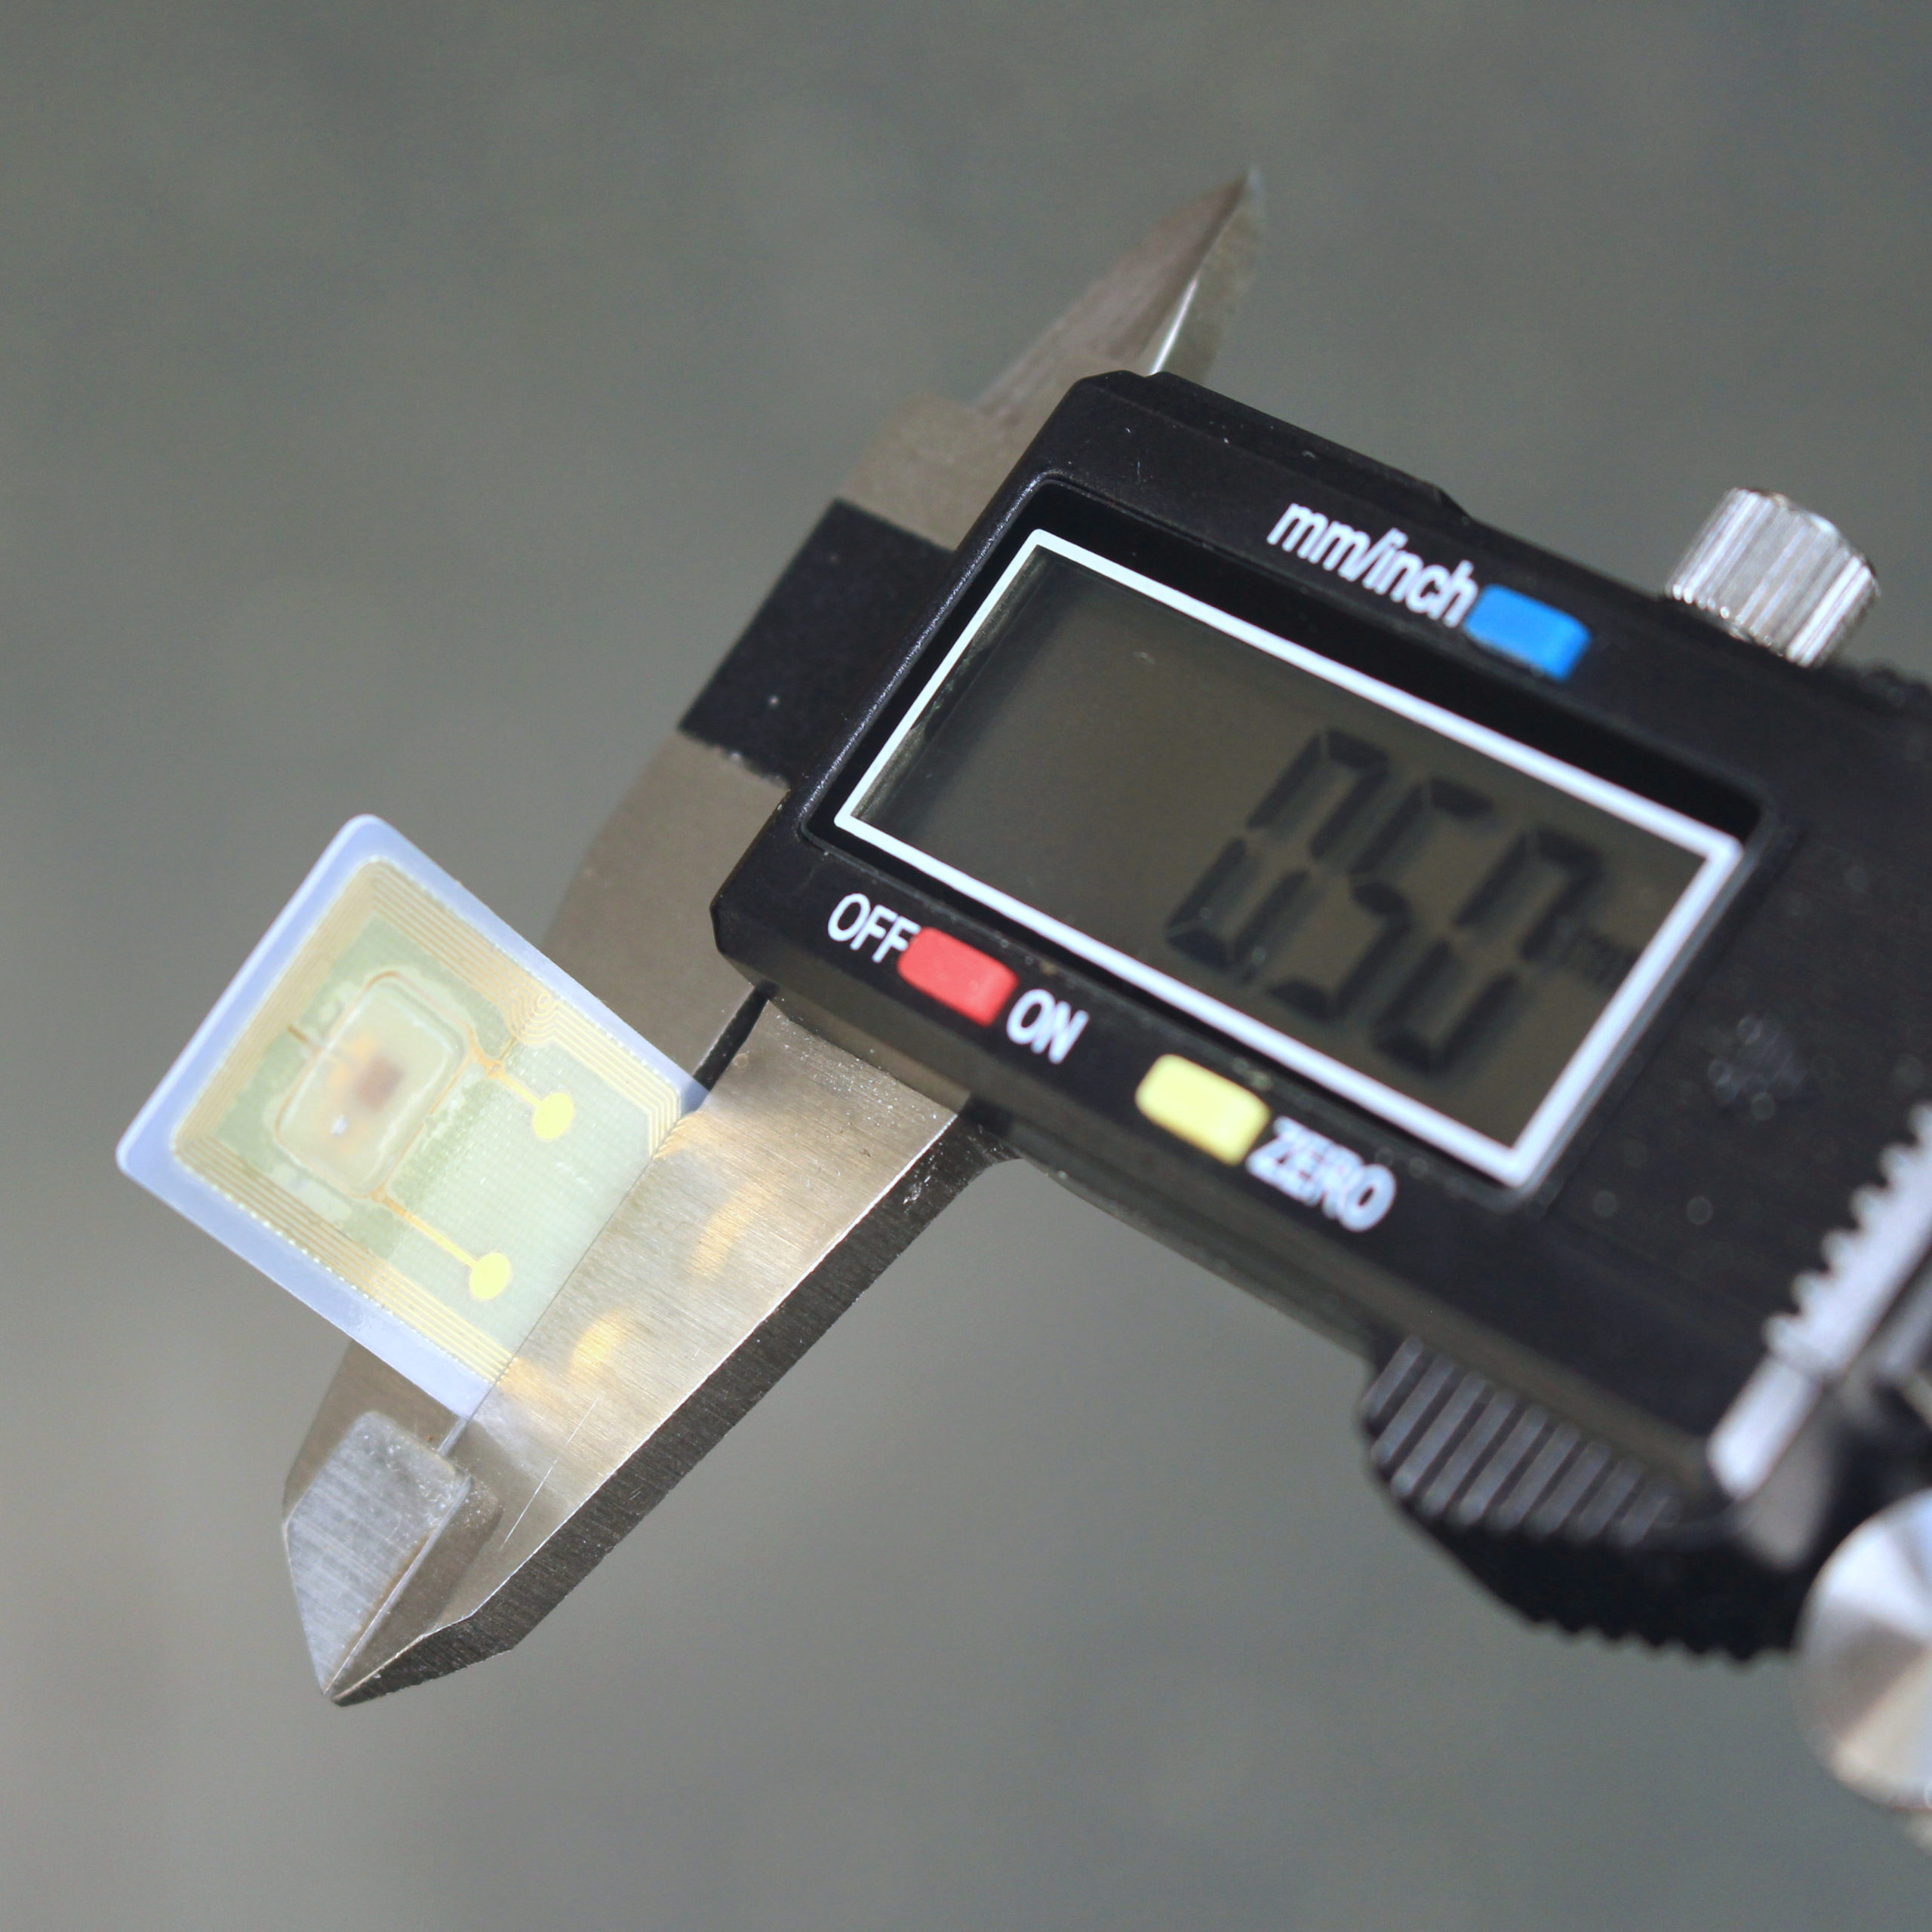 Converted payment micro-card implant in calipers